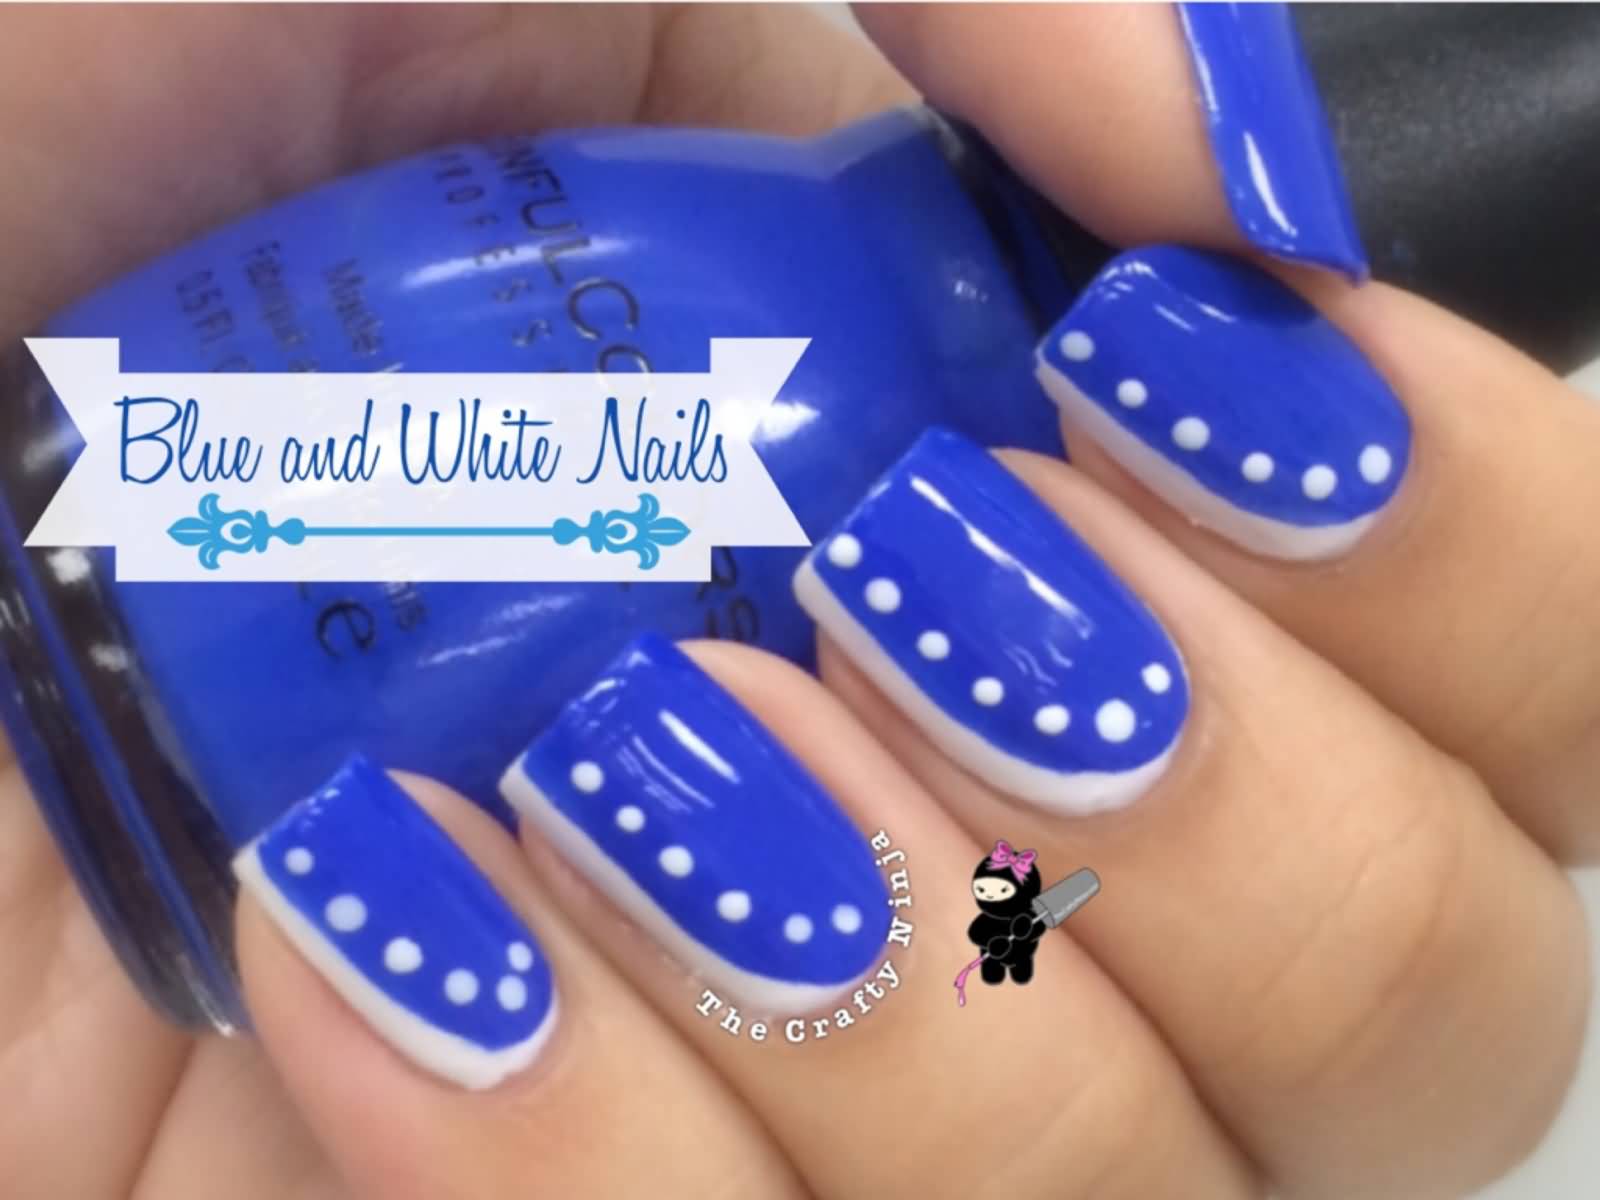 Blue Nails With White Dots Nail Design Idea